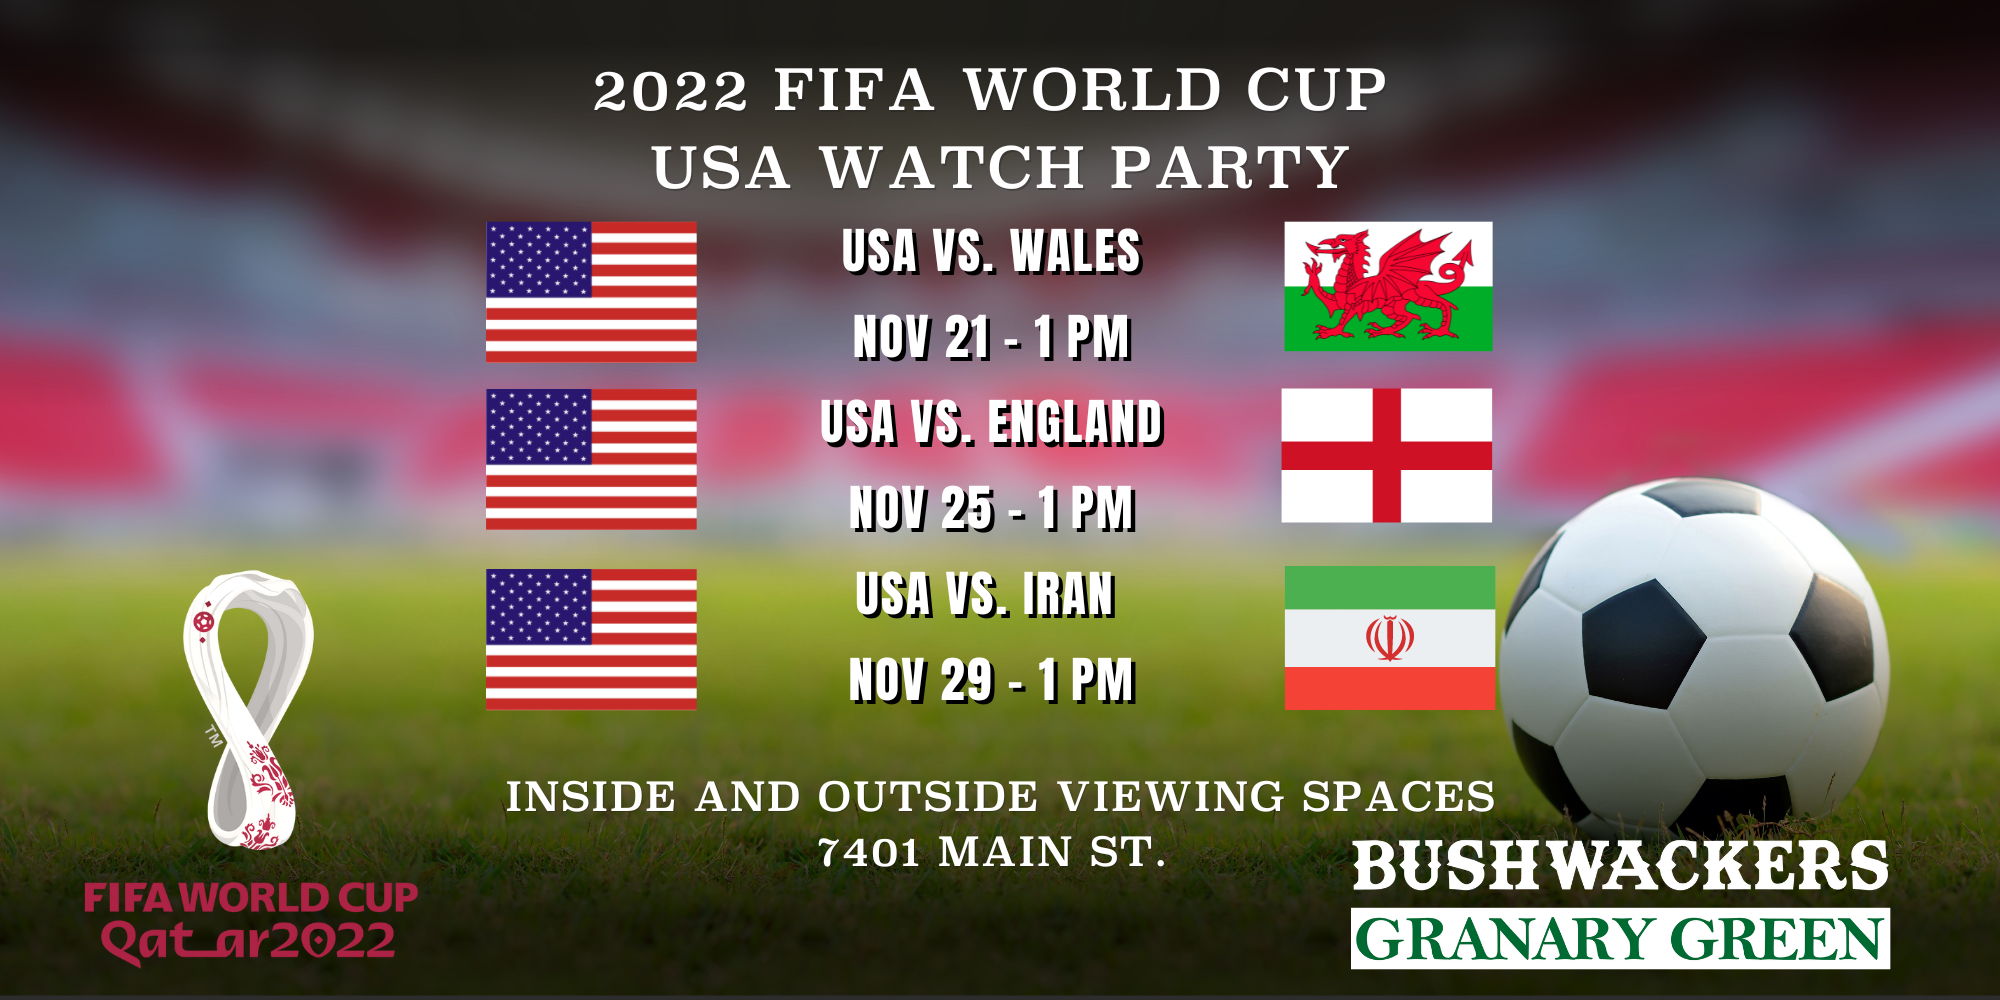 FIFA WC USA Watch Party - USA v. England (game time 1pm) promotional image